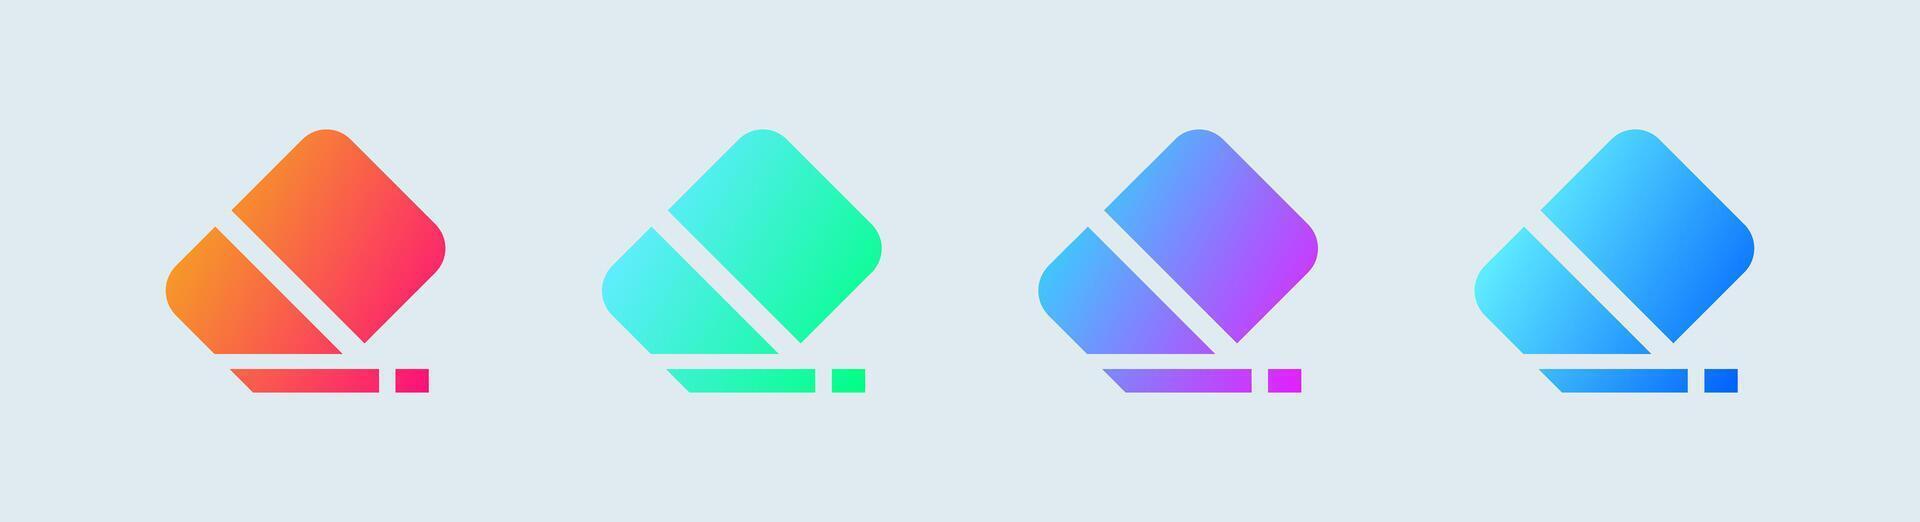 Eraser solid icon in gradient colors. Wipe out signs vector illustration.